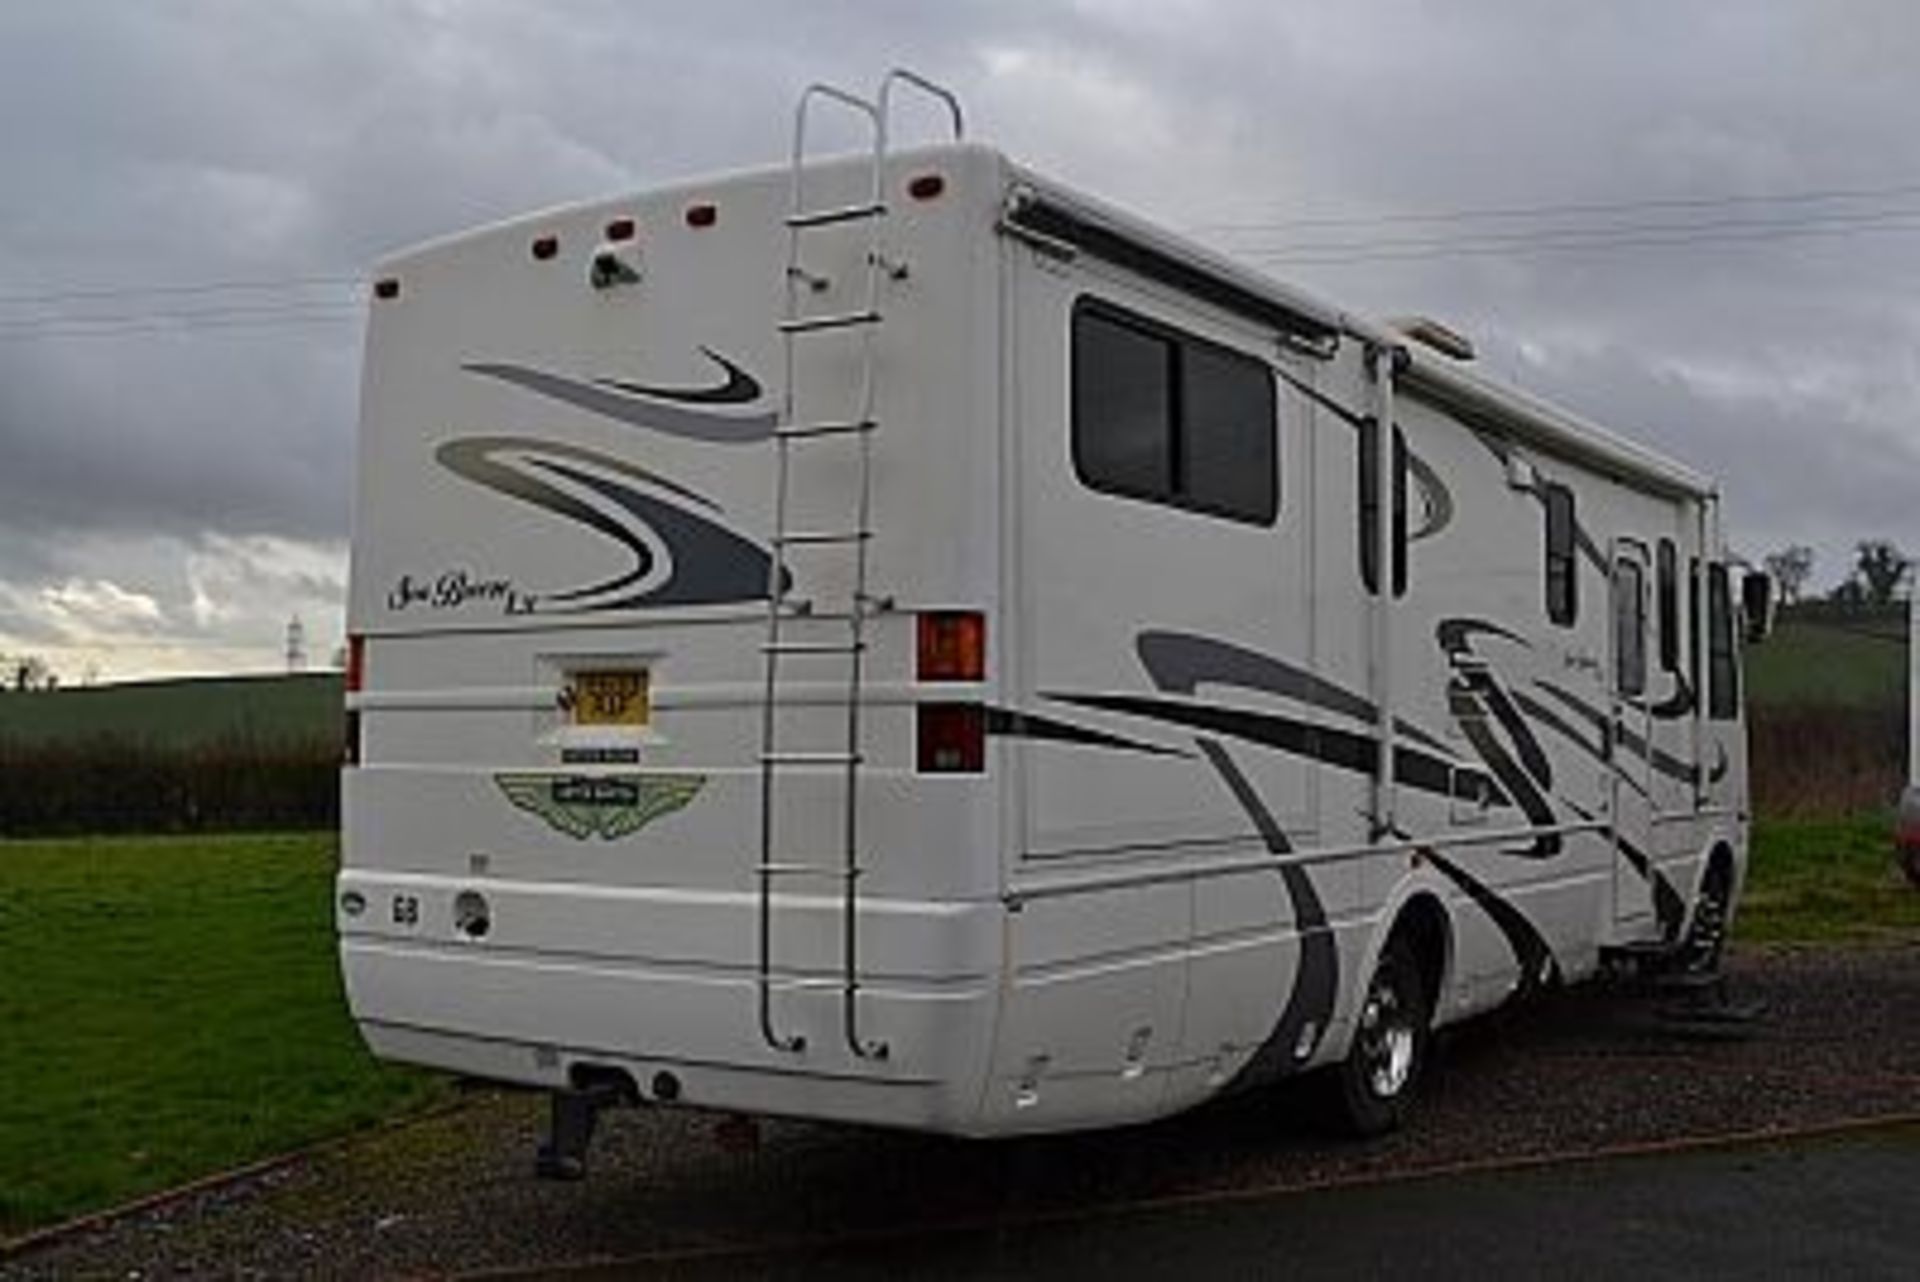 2005 Seabreeze LX Motor Home Registered in 2005 - Mounted on work horse W/22 chassis 33' 11"" - Image 2 of 8